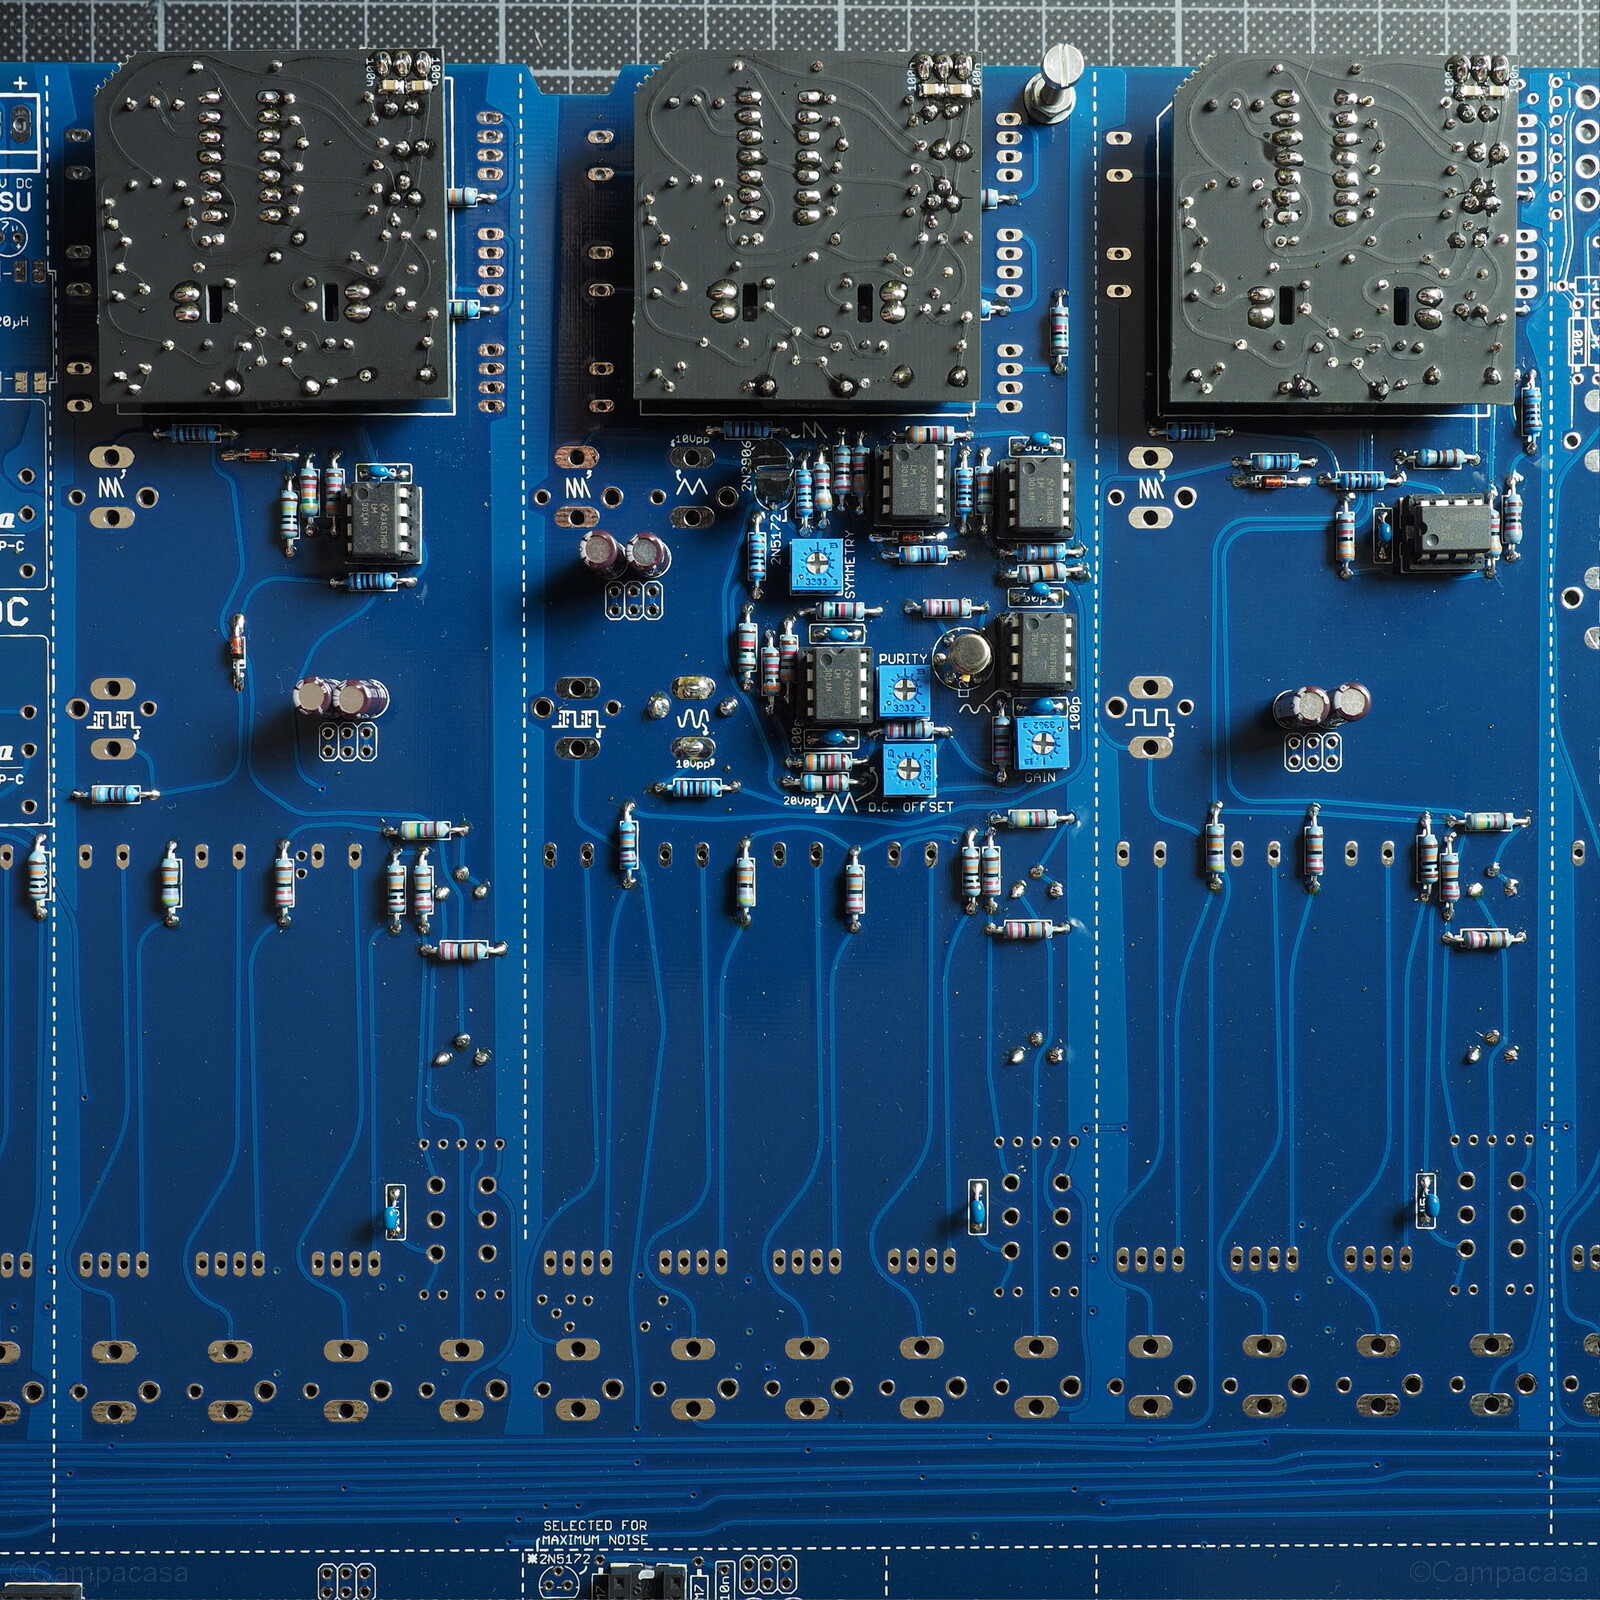 Main Board, VCO 1, 2 and 3 with Small VCO Boards Mounted